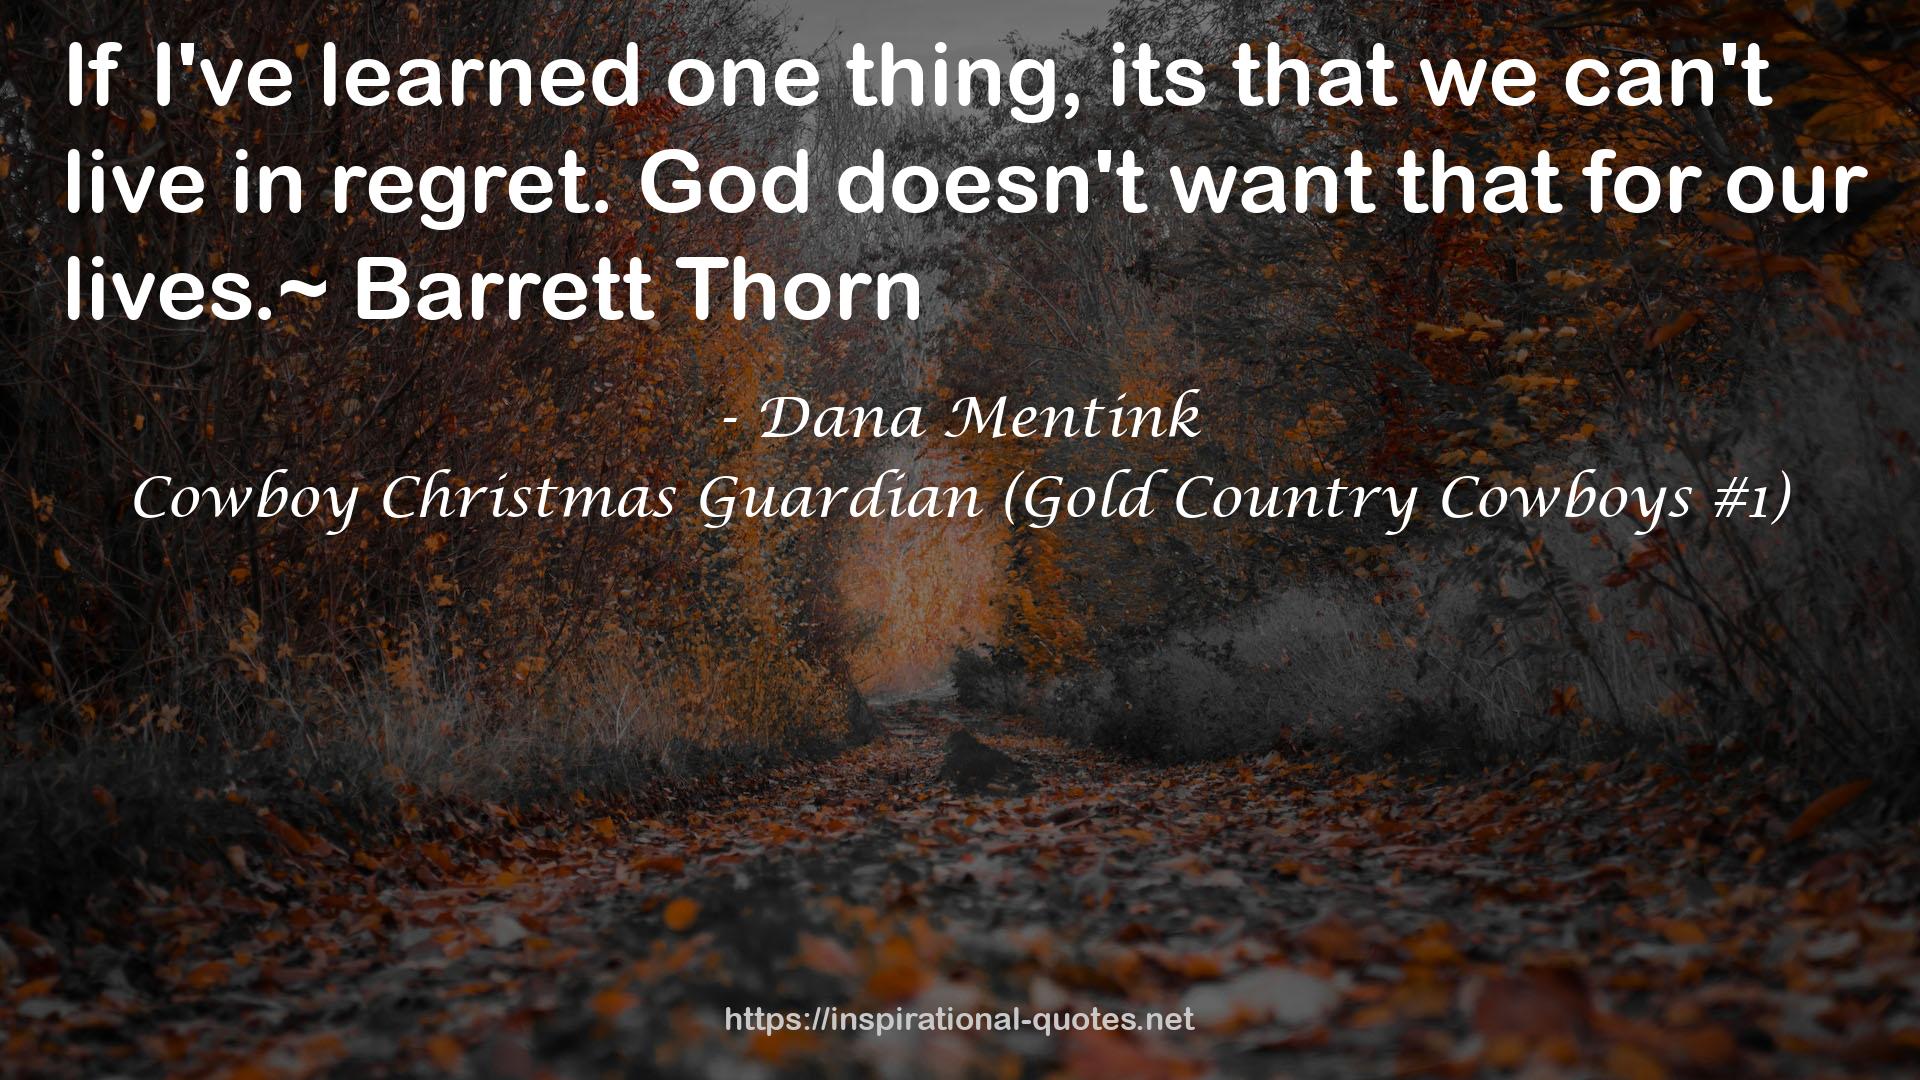 Cowboy Christmas Guardian (Gold Country Cowboys #1) QUOTES